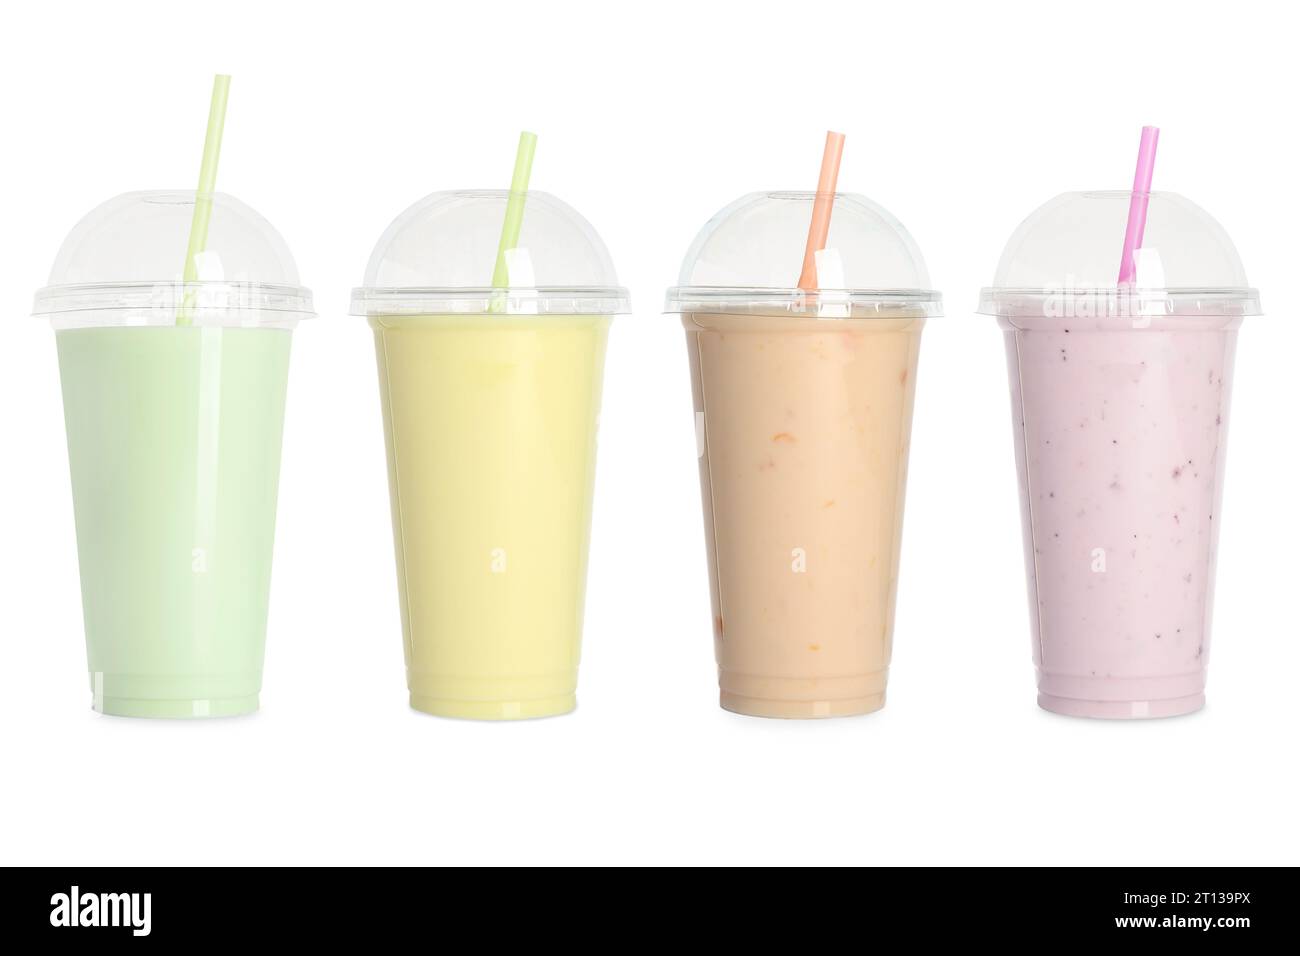 https://c8.alamy.com/comp/2T139PX/plastic-cups-with-tasty-smoothies-isolated-on-white-set-2T139PX.jpg